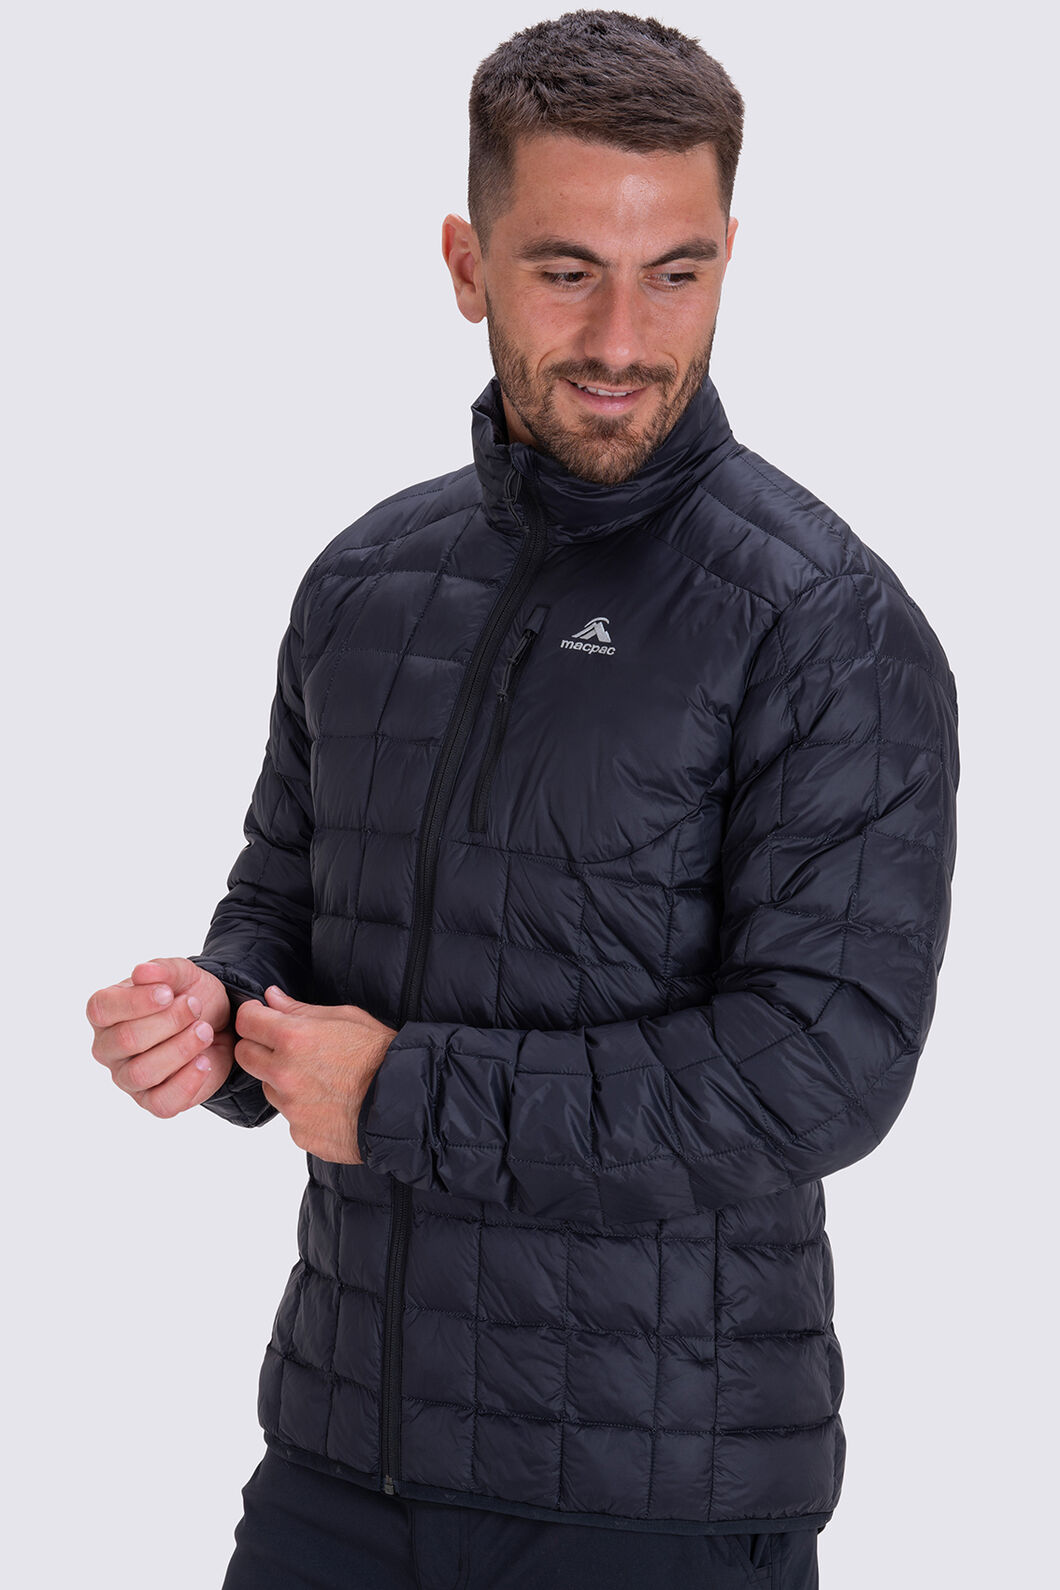 Unlock Wilderness' choice in the Macpac Vs North Face comparison, the Uber Light Insulated Jacket by Macpac